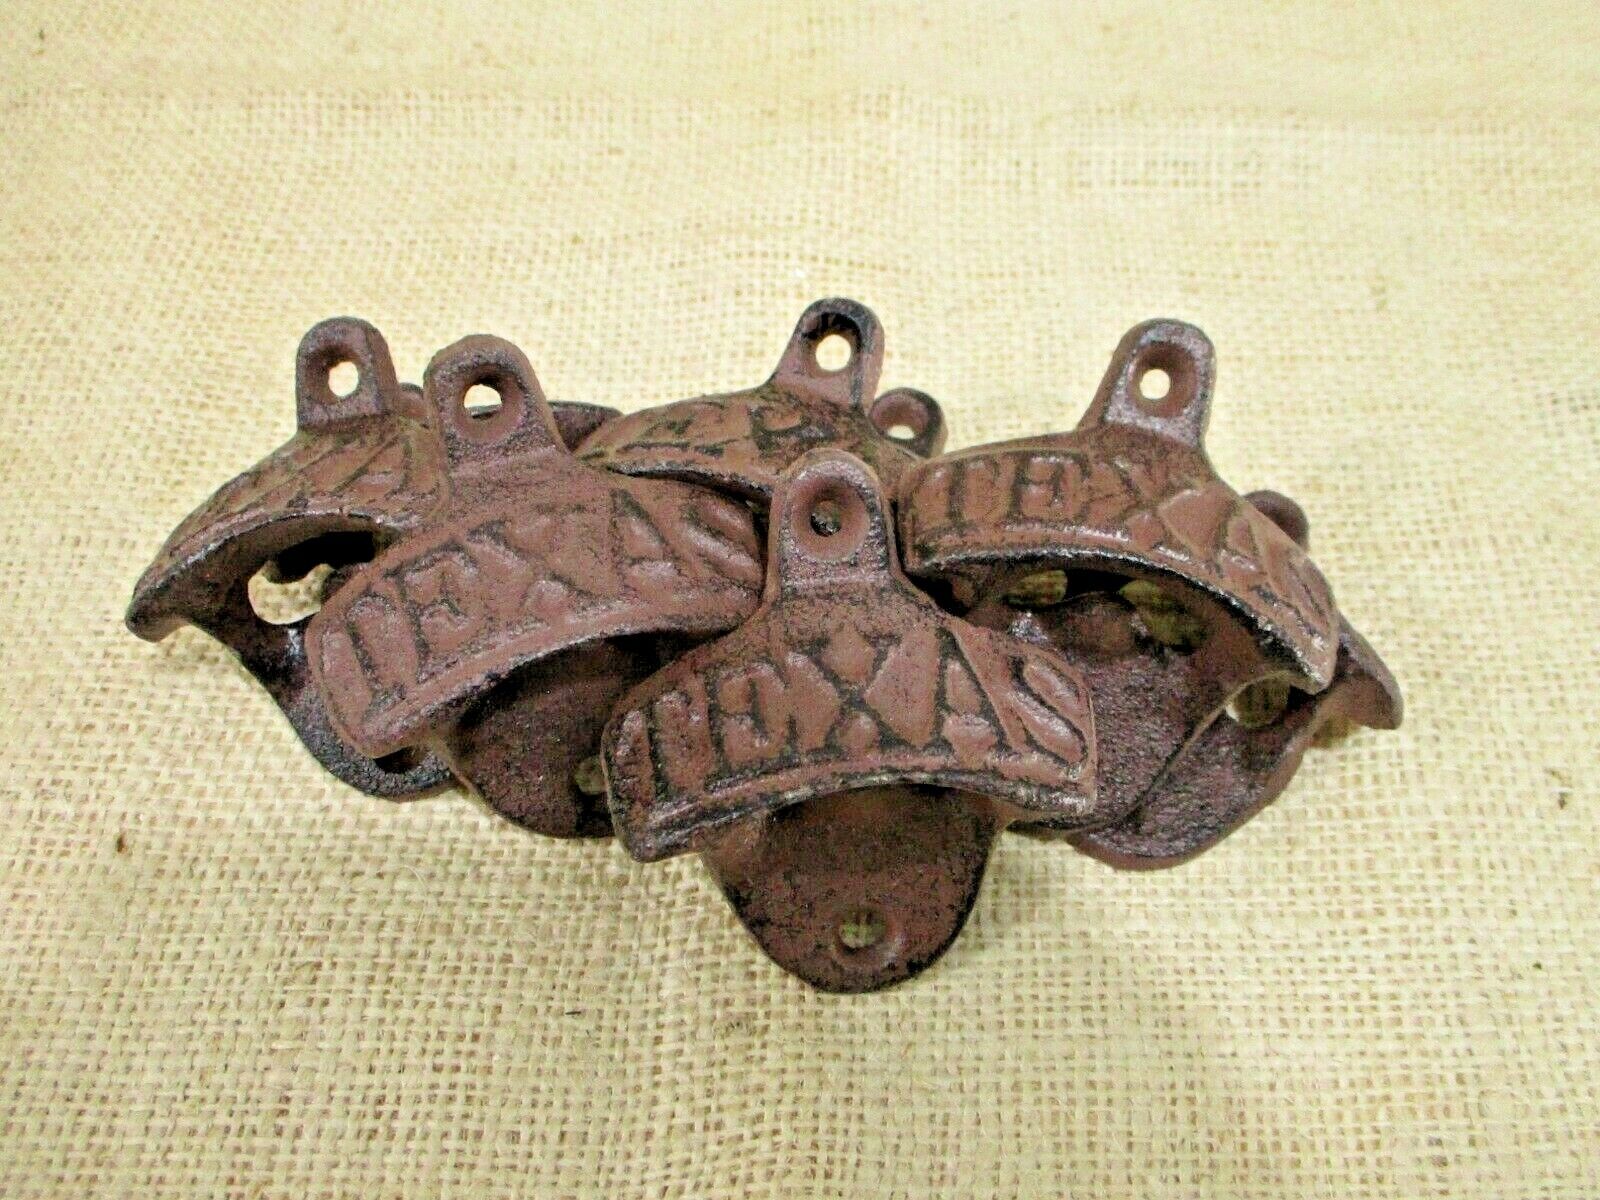 100 Texas Beer Soda Bottle Openers Cast Iron Wall Mounted Man Cave Rustic Gift